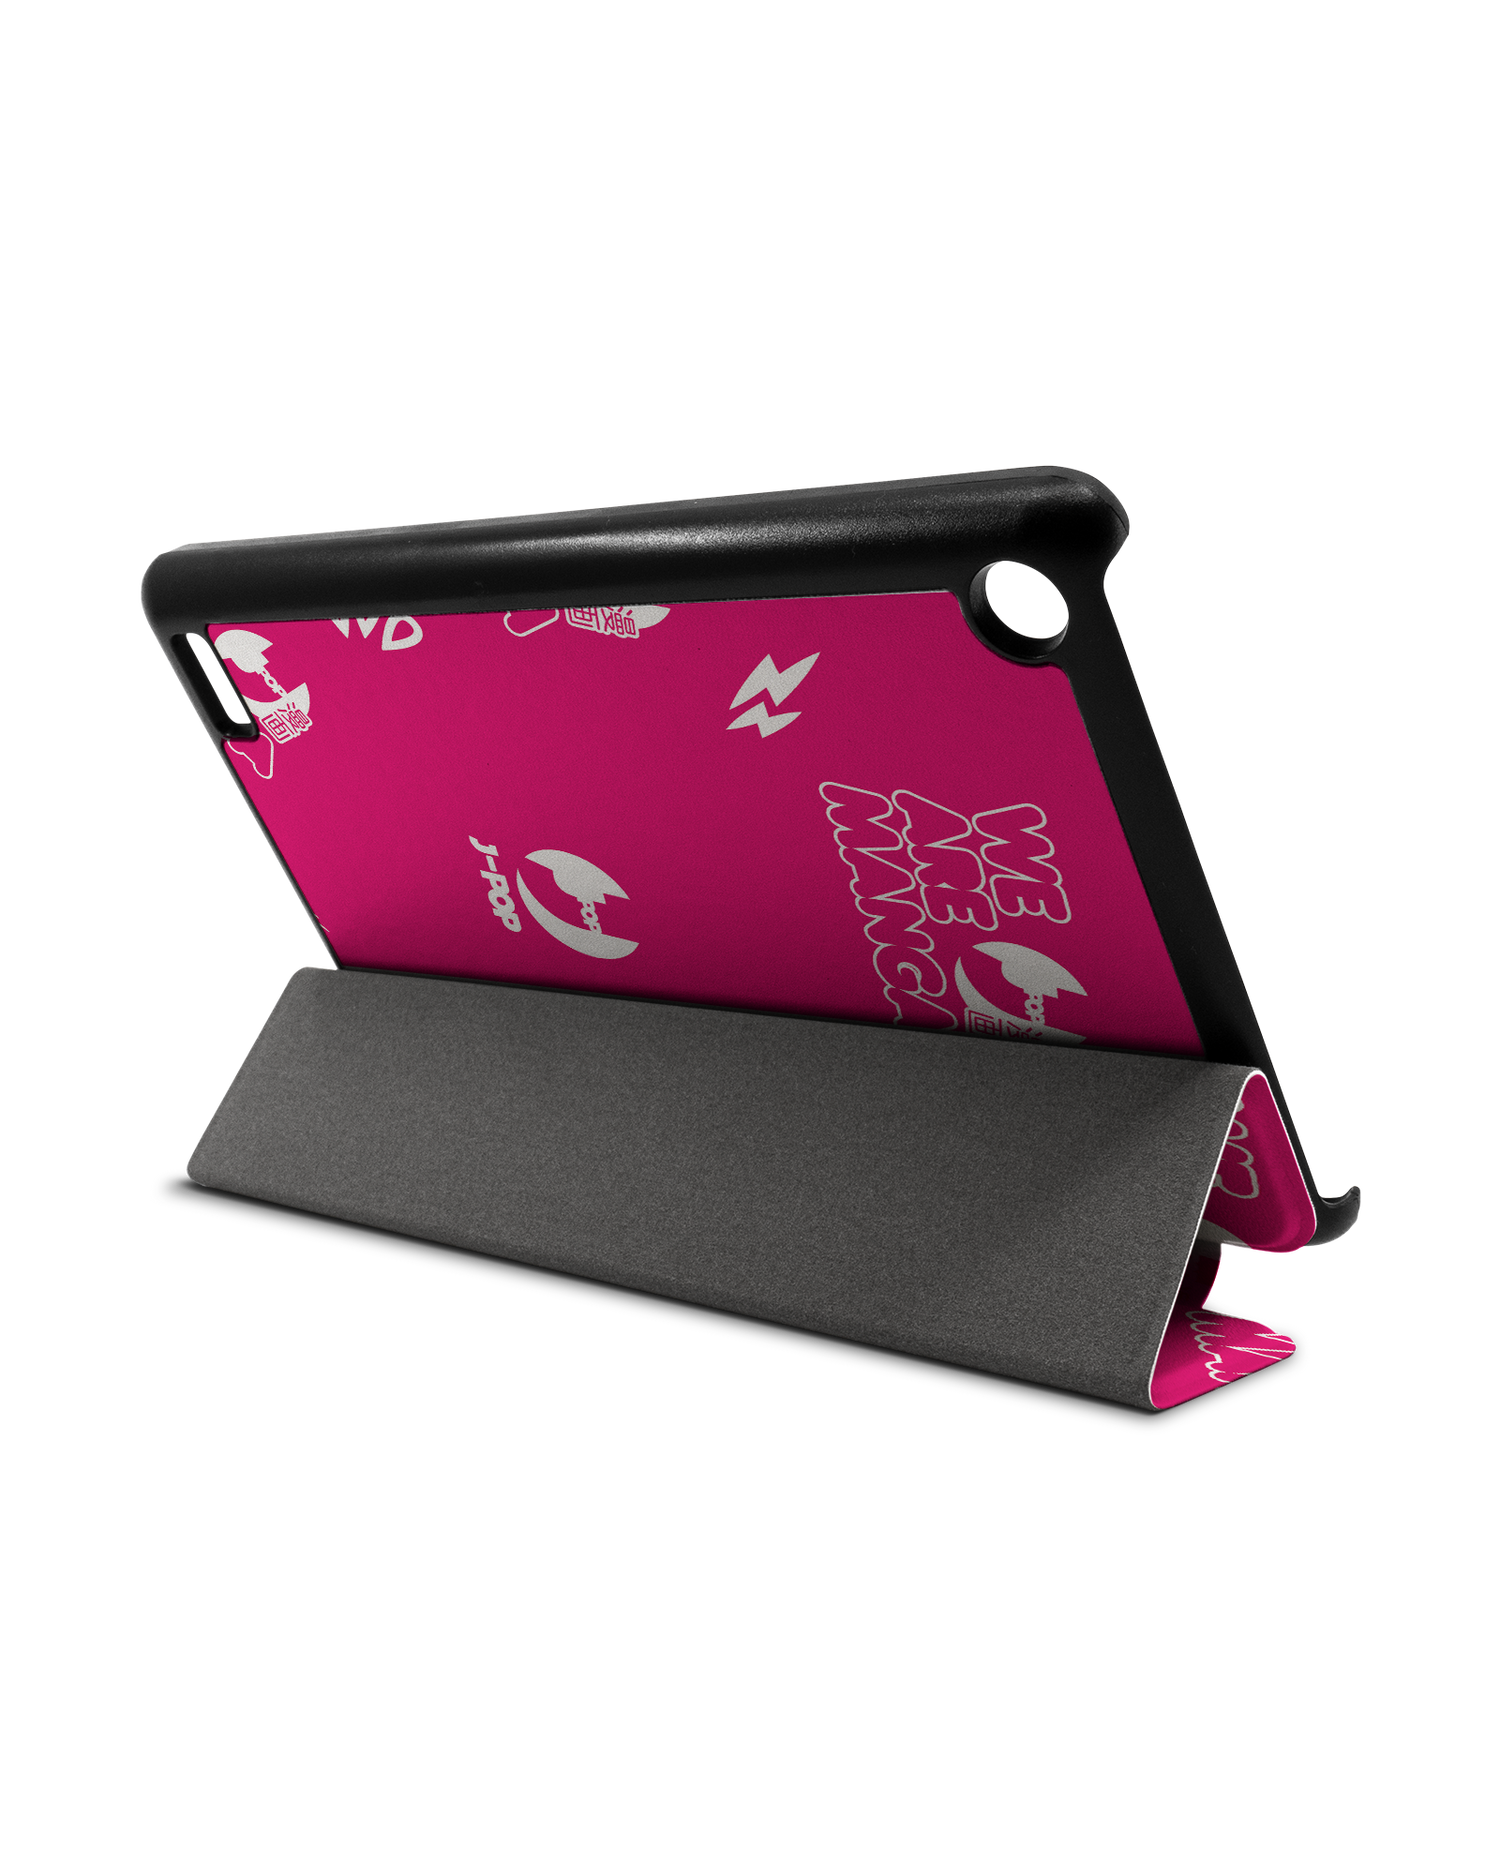 #WeAreManga Tablet Smart Case for Amazon Fire 7: Used as Stand